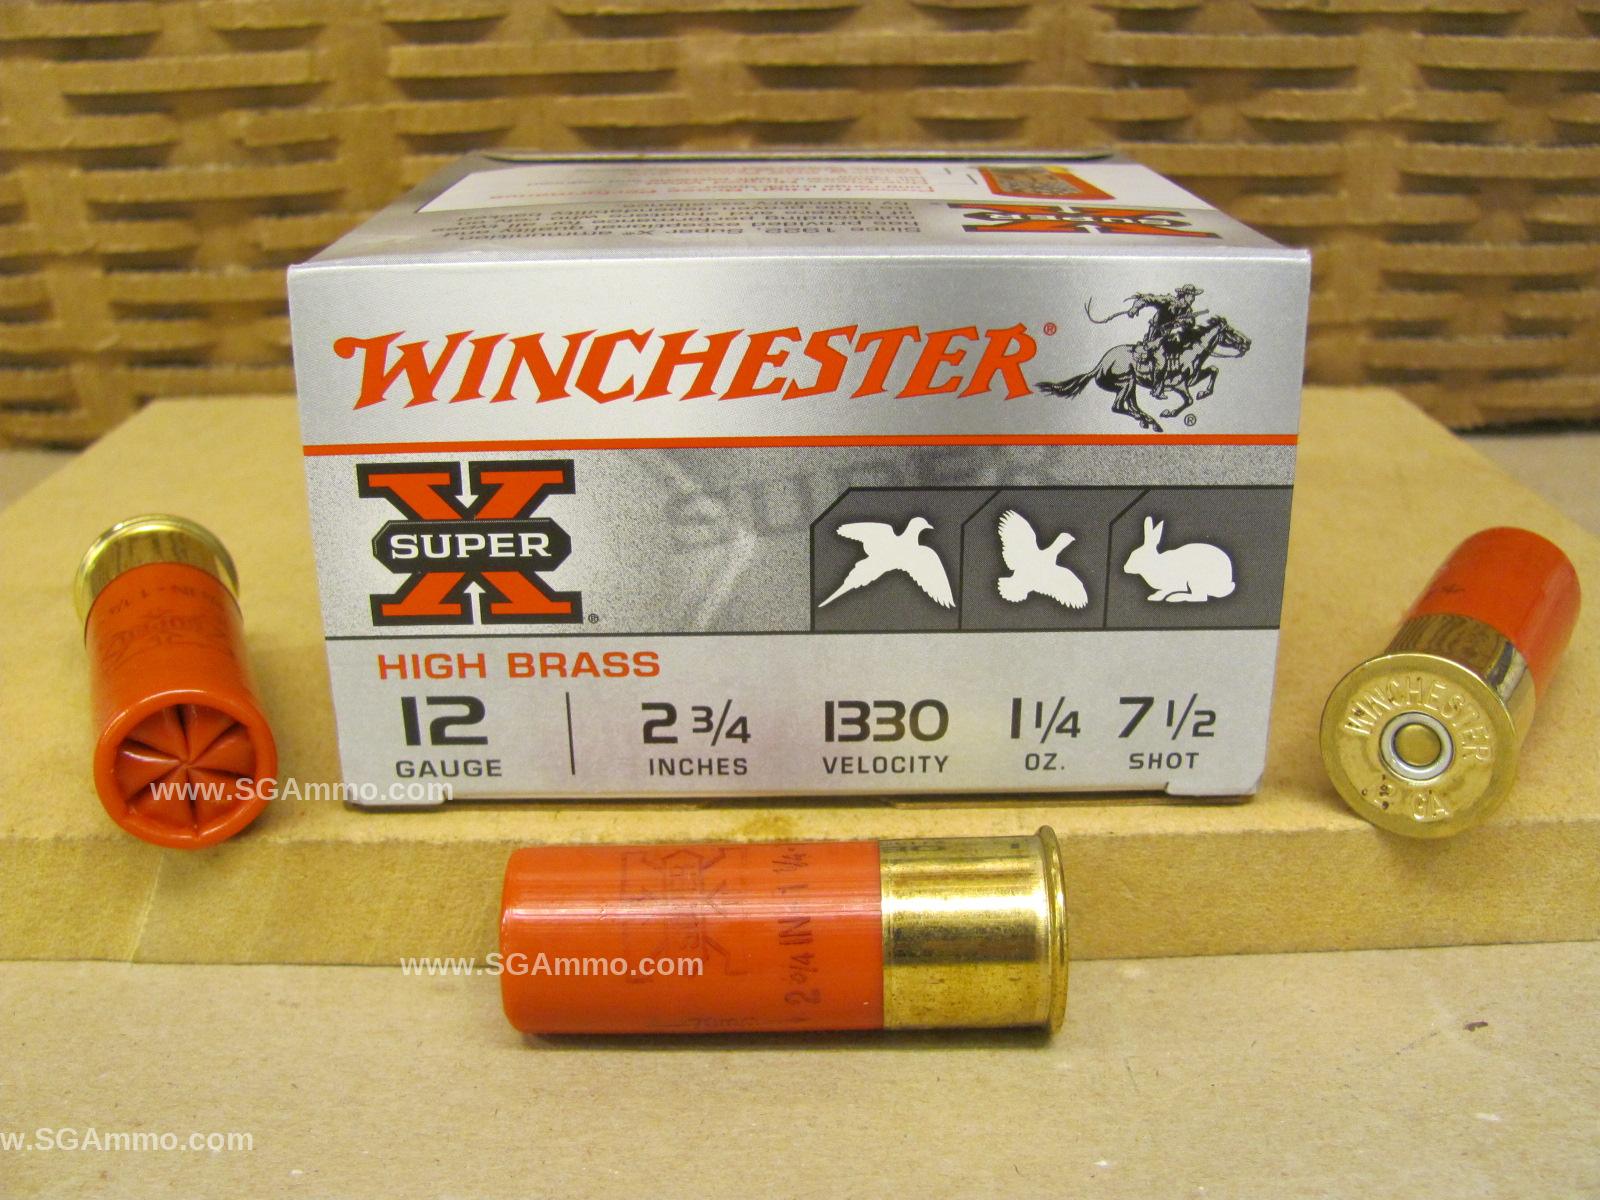 250 Round Case - 12 Gauge 2.75 Inch 1-1/4 Ounce 7.5 Shot Winchester High Brass Game Load Ammo - X127 